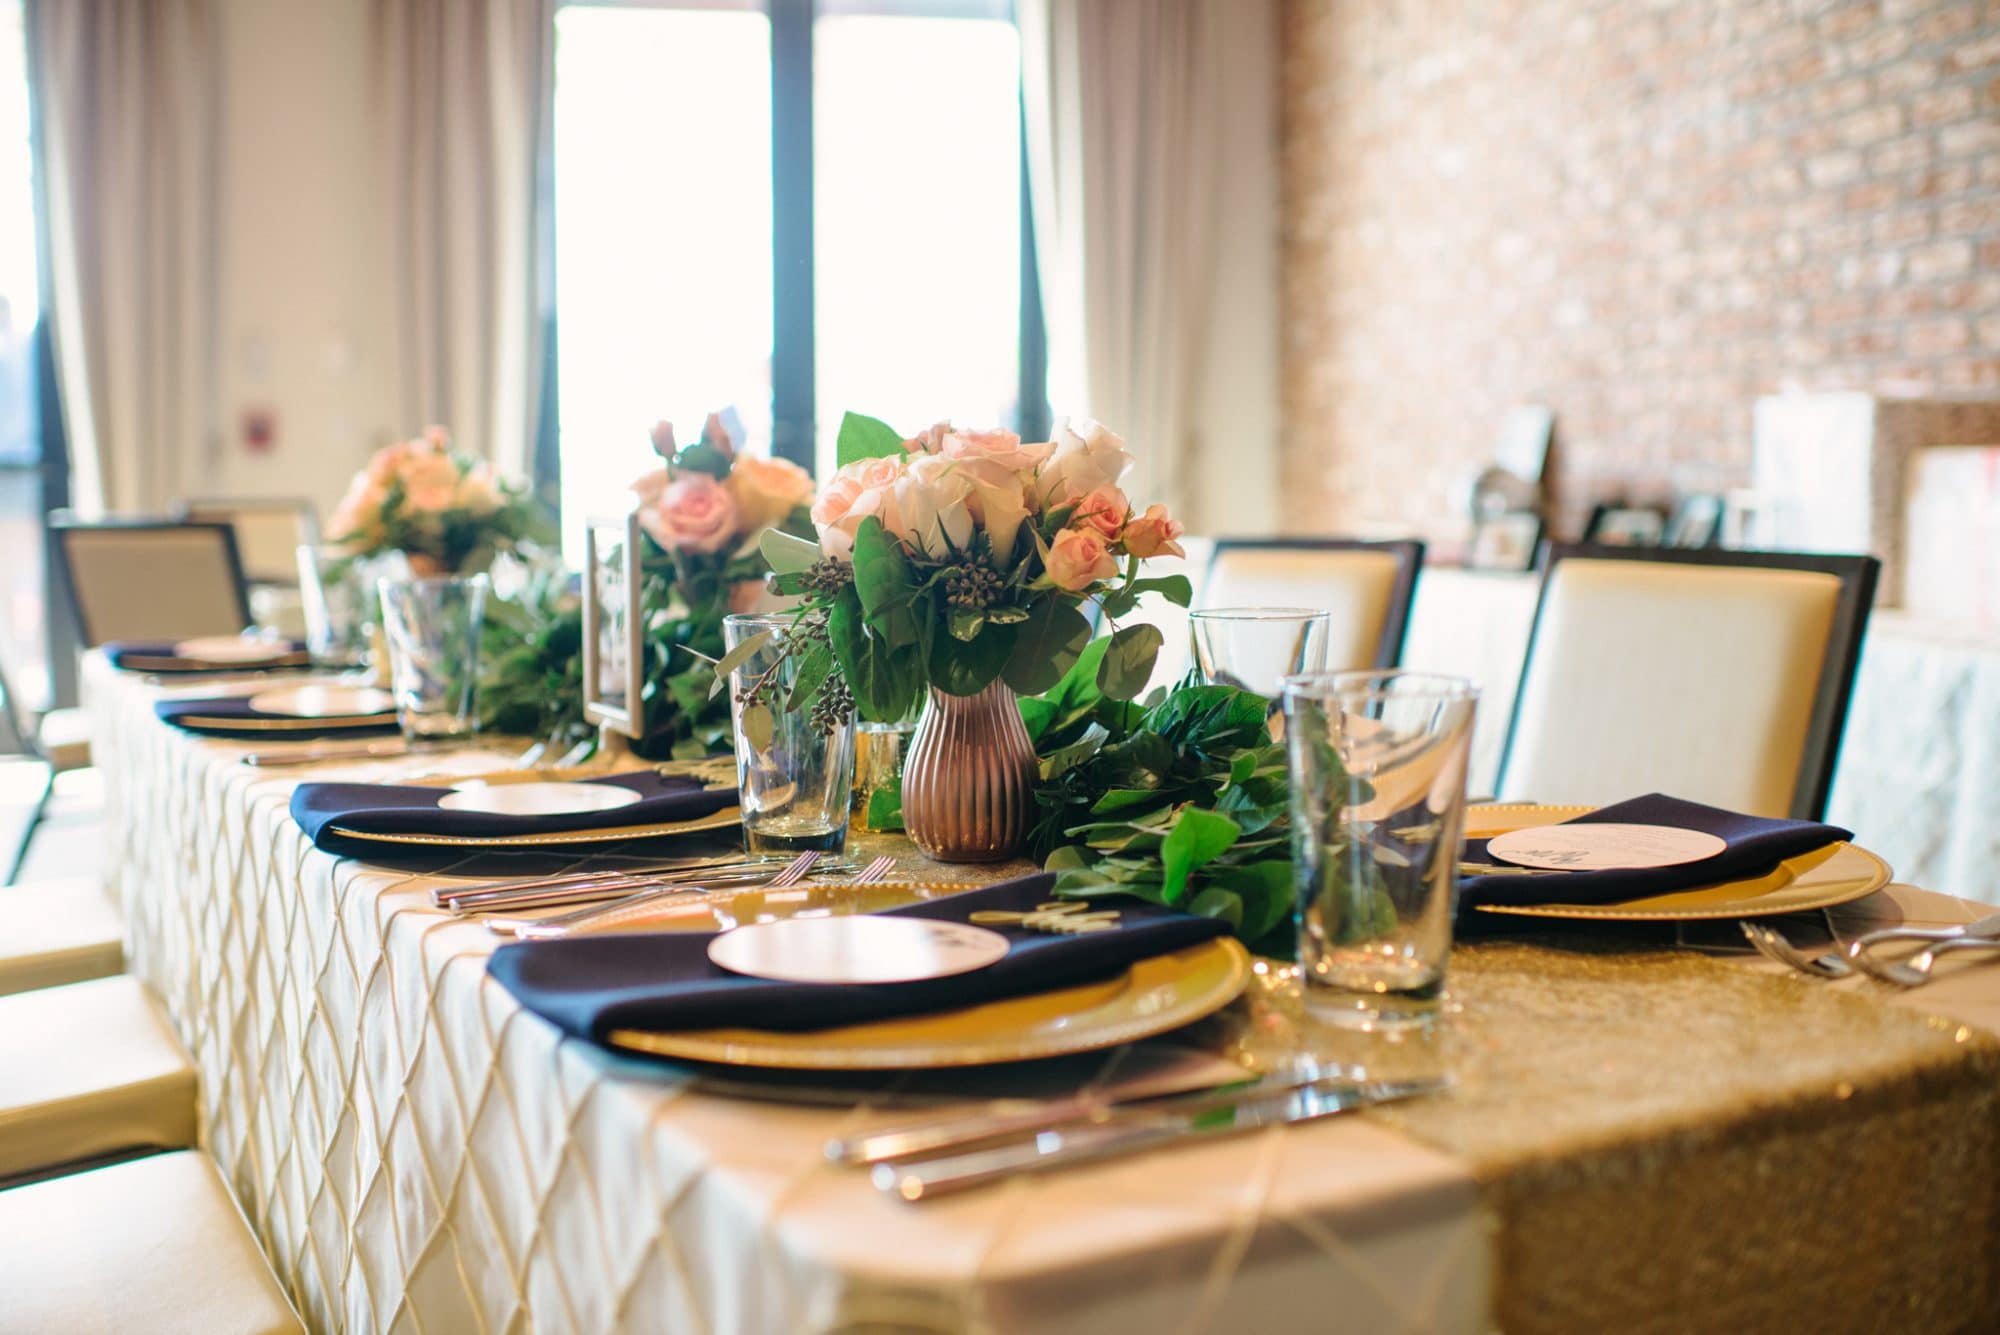 Lakehouse Lake Nona - lovely tablescape with gold tablecloth and gold vases